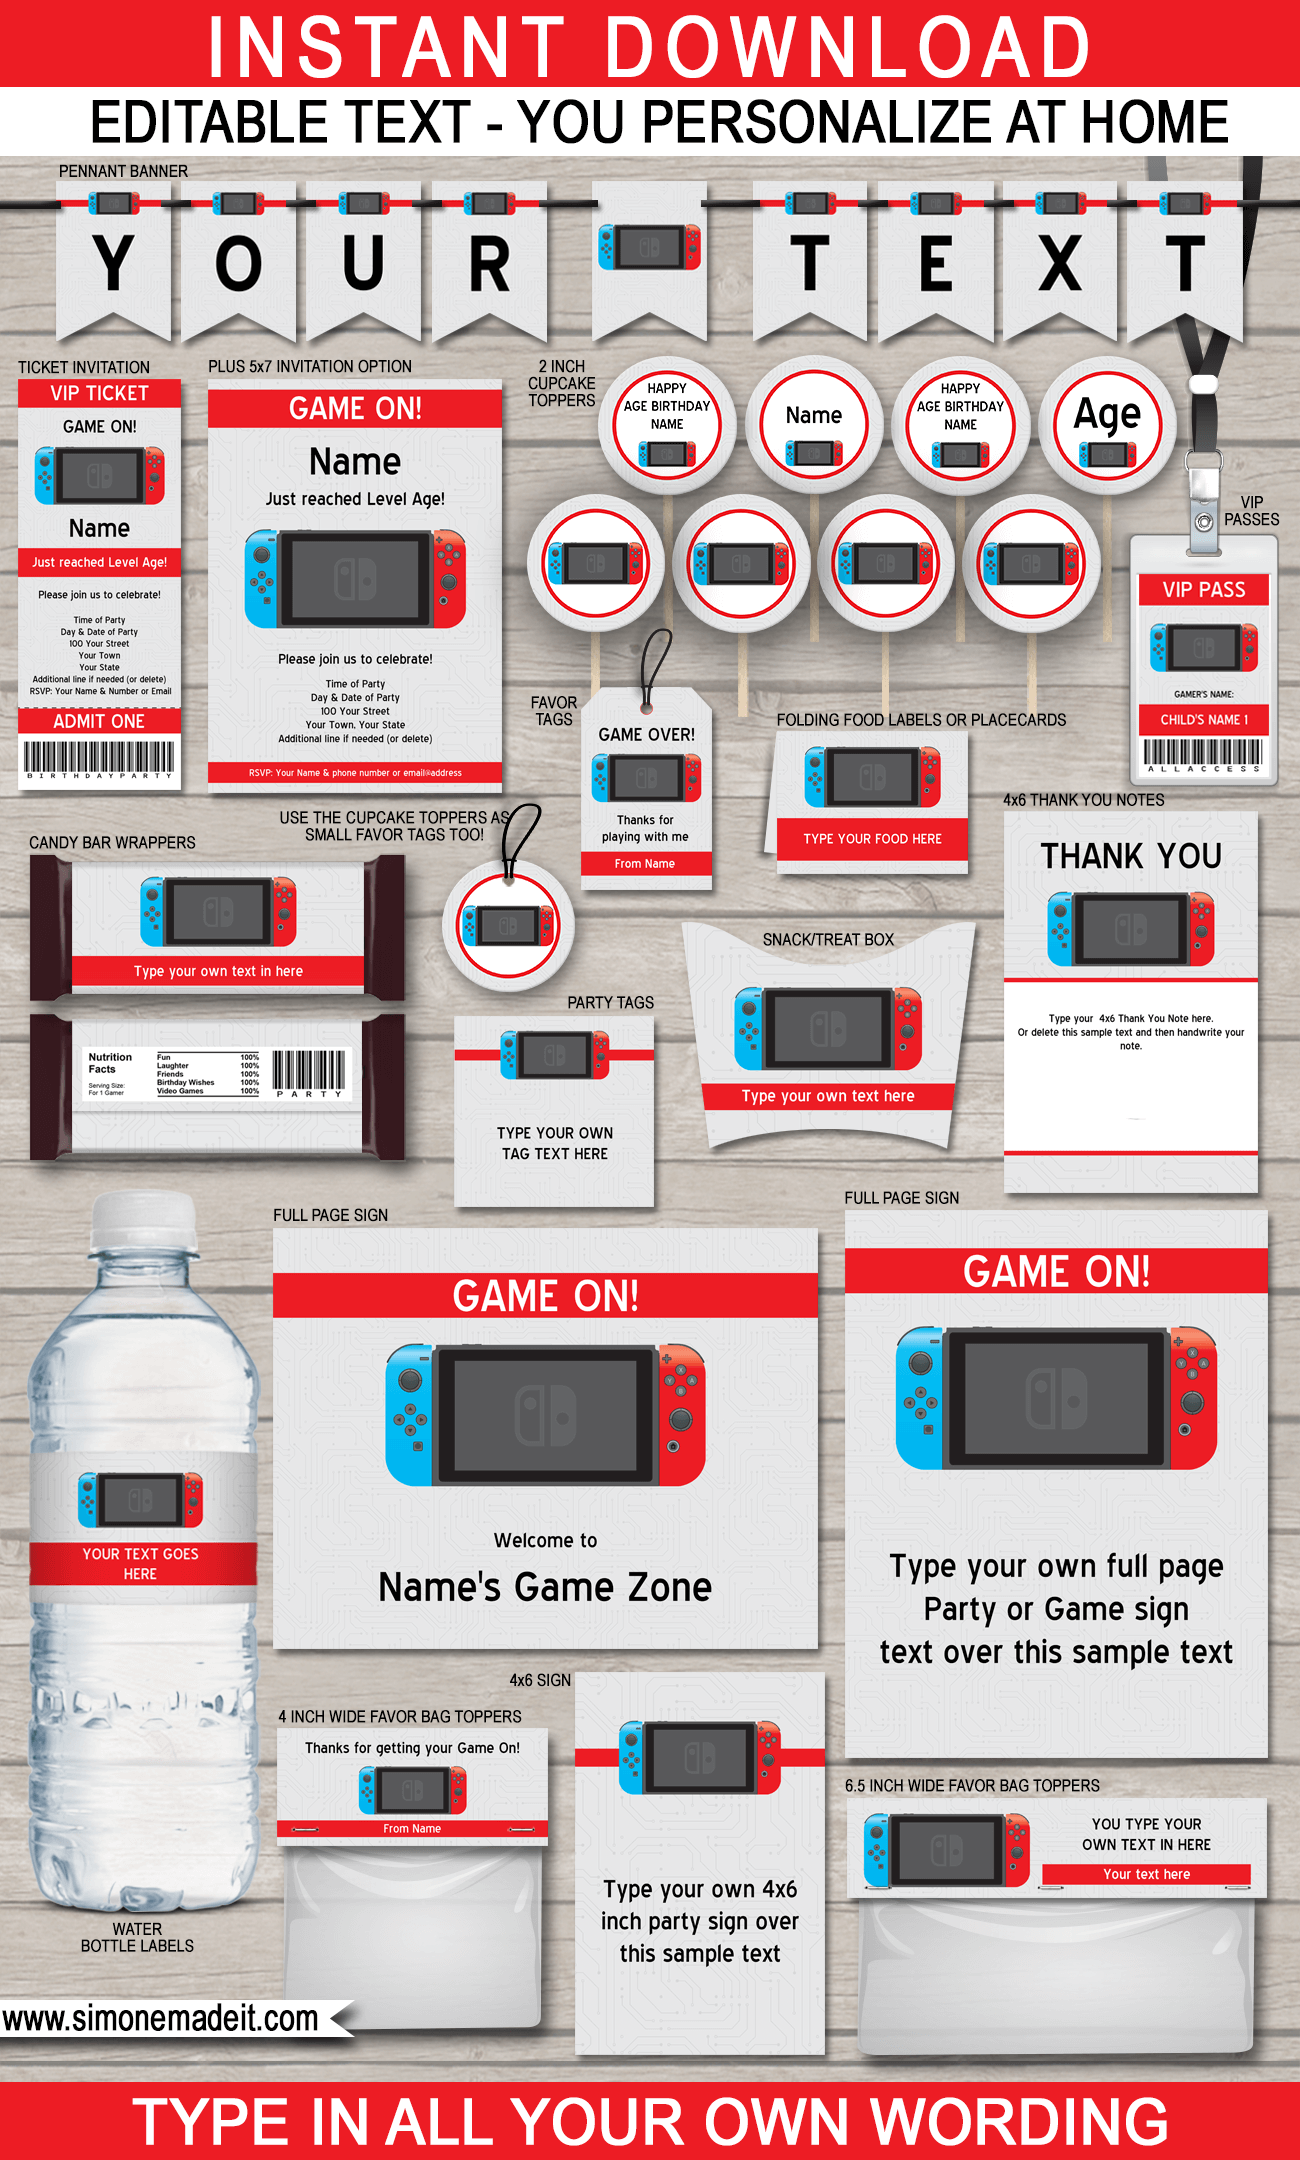 Nintendo Switch Party Printables, Invitations & Decorations - Video Game Theme Birthday Party - Red & Blue - Gamer - Editable & Printable templates - INSTANT DOWNLOAD via simonemadeit.com